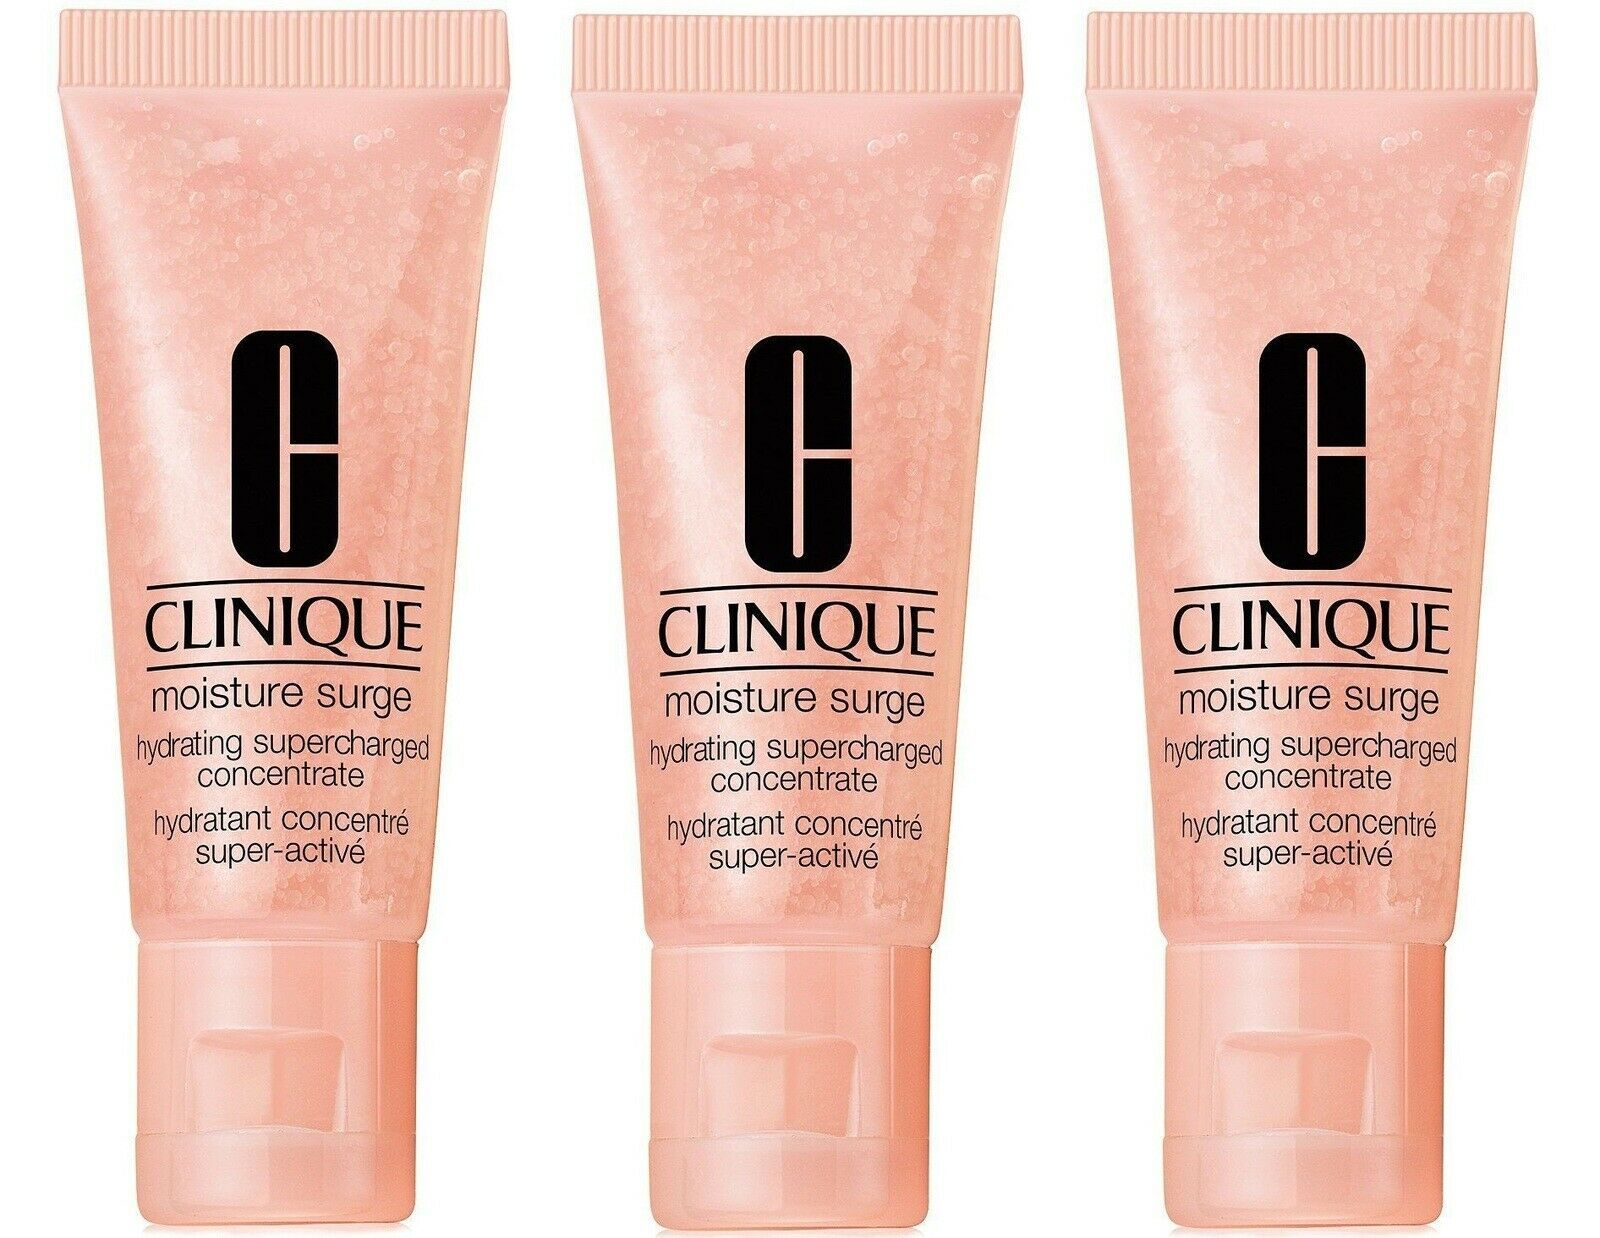 Clinique Moisture Surge Hydrating Supercharged Concentrate - 1.5 oz/45 ml TOTAL